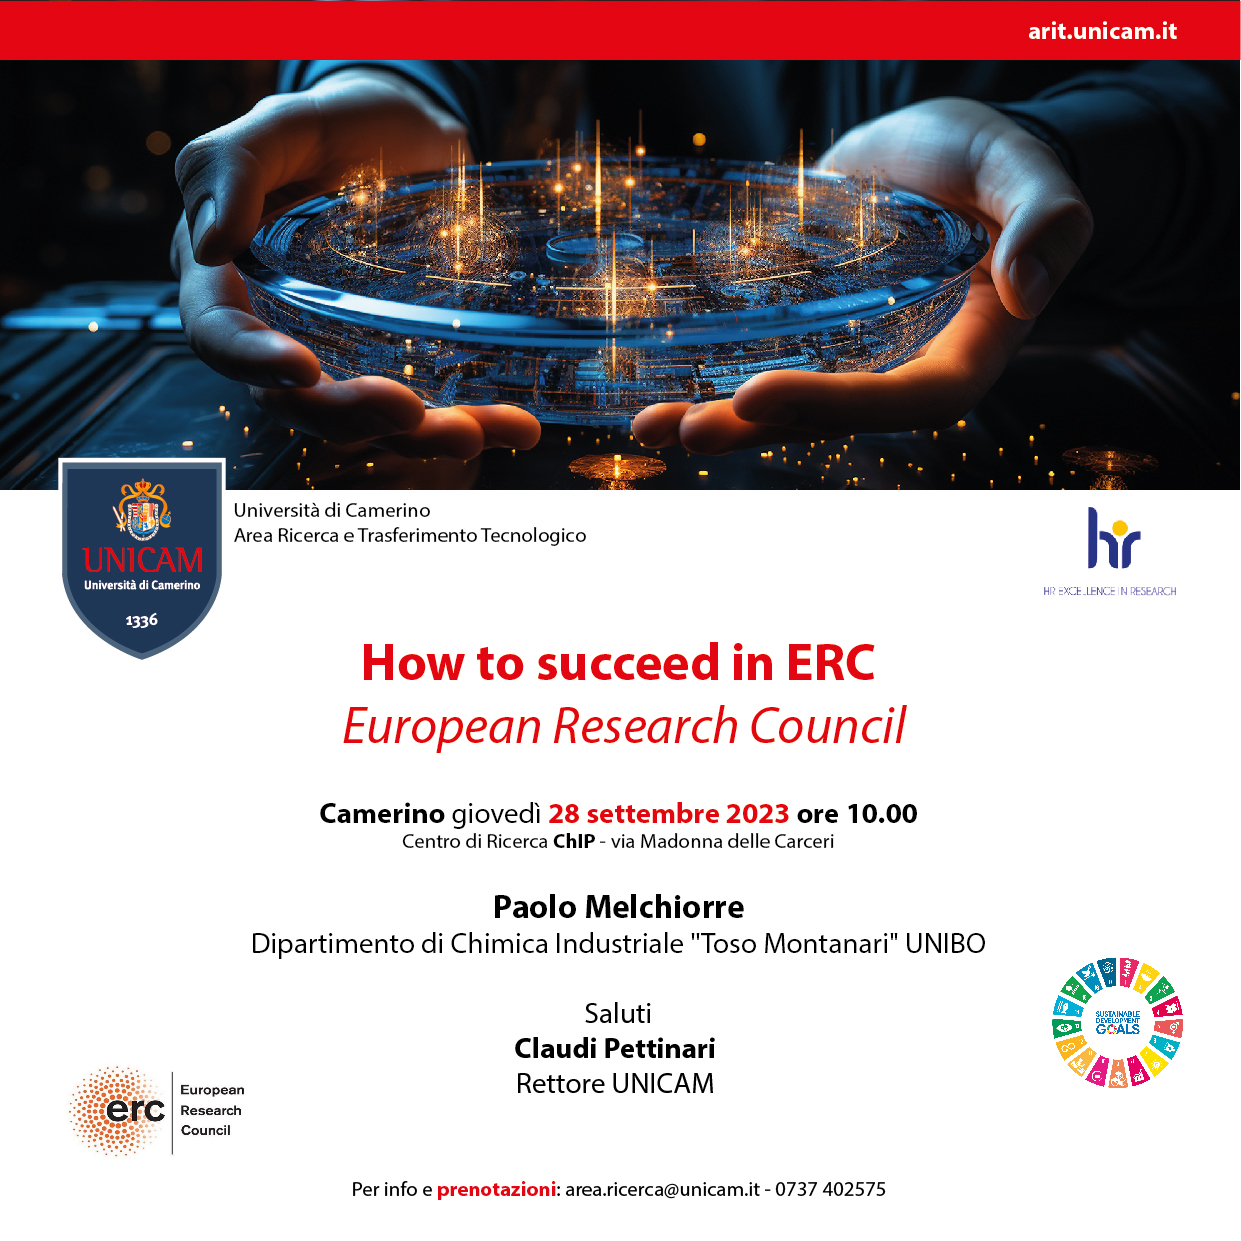 How to succeed in ERC